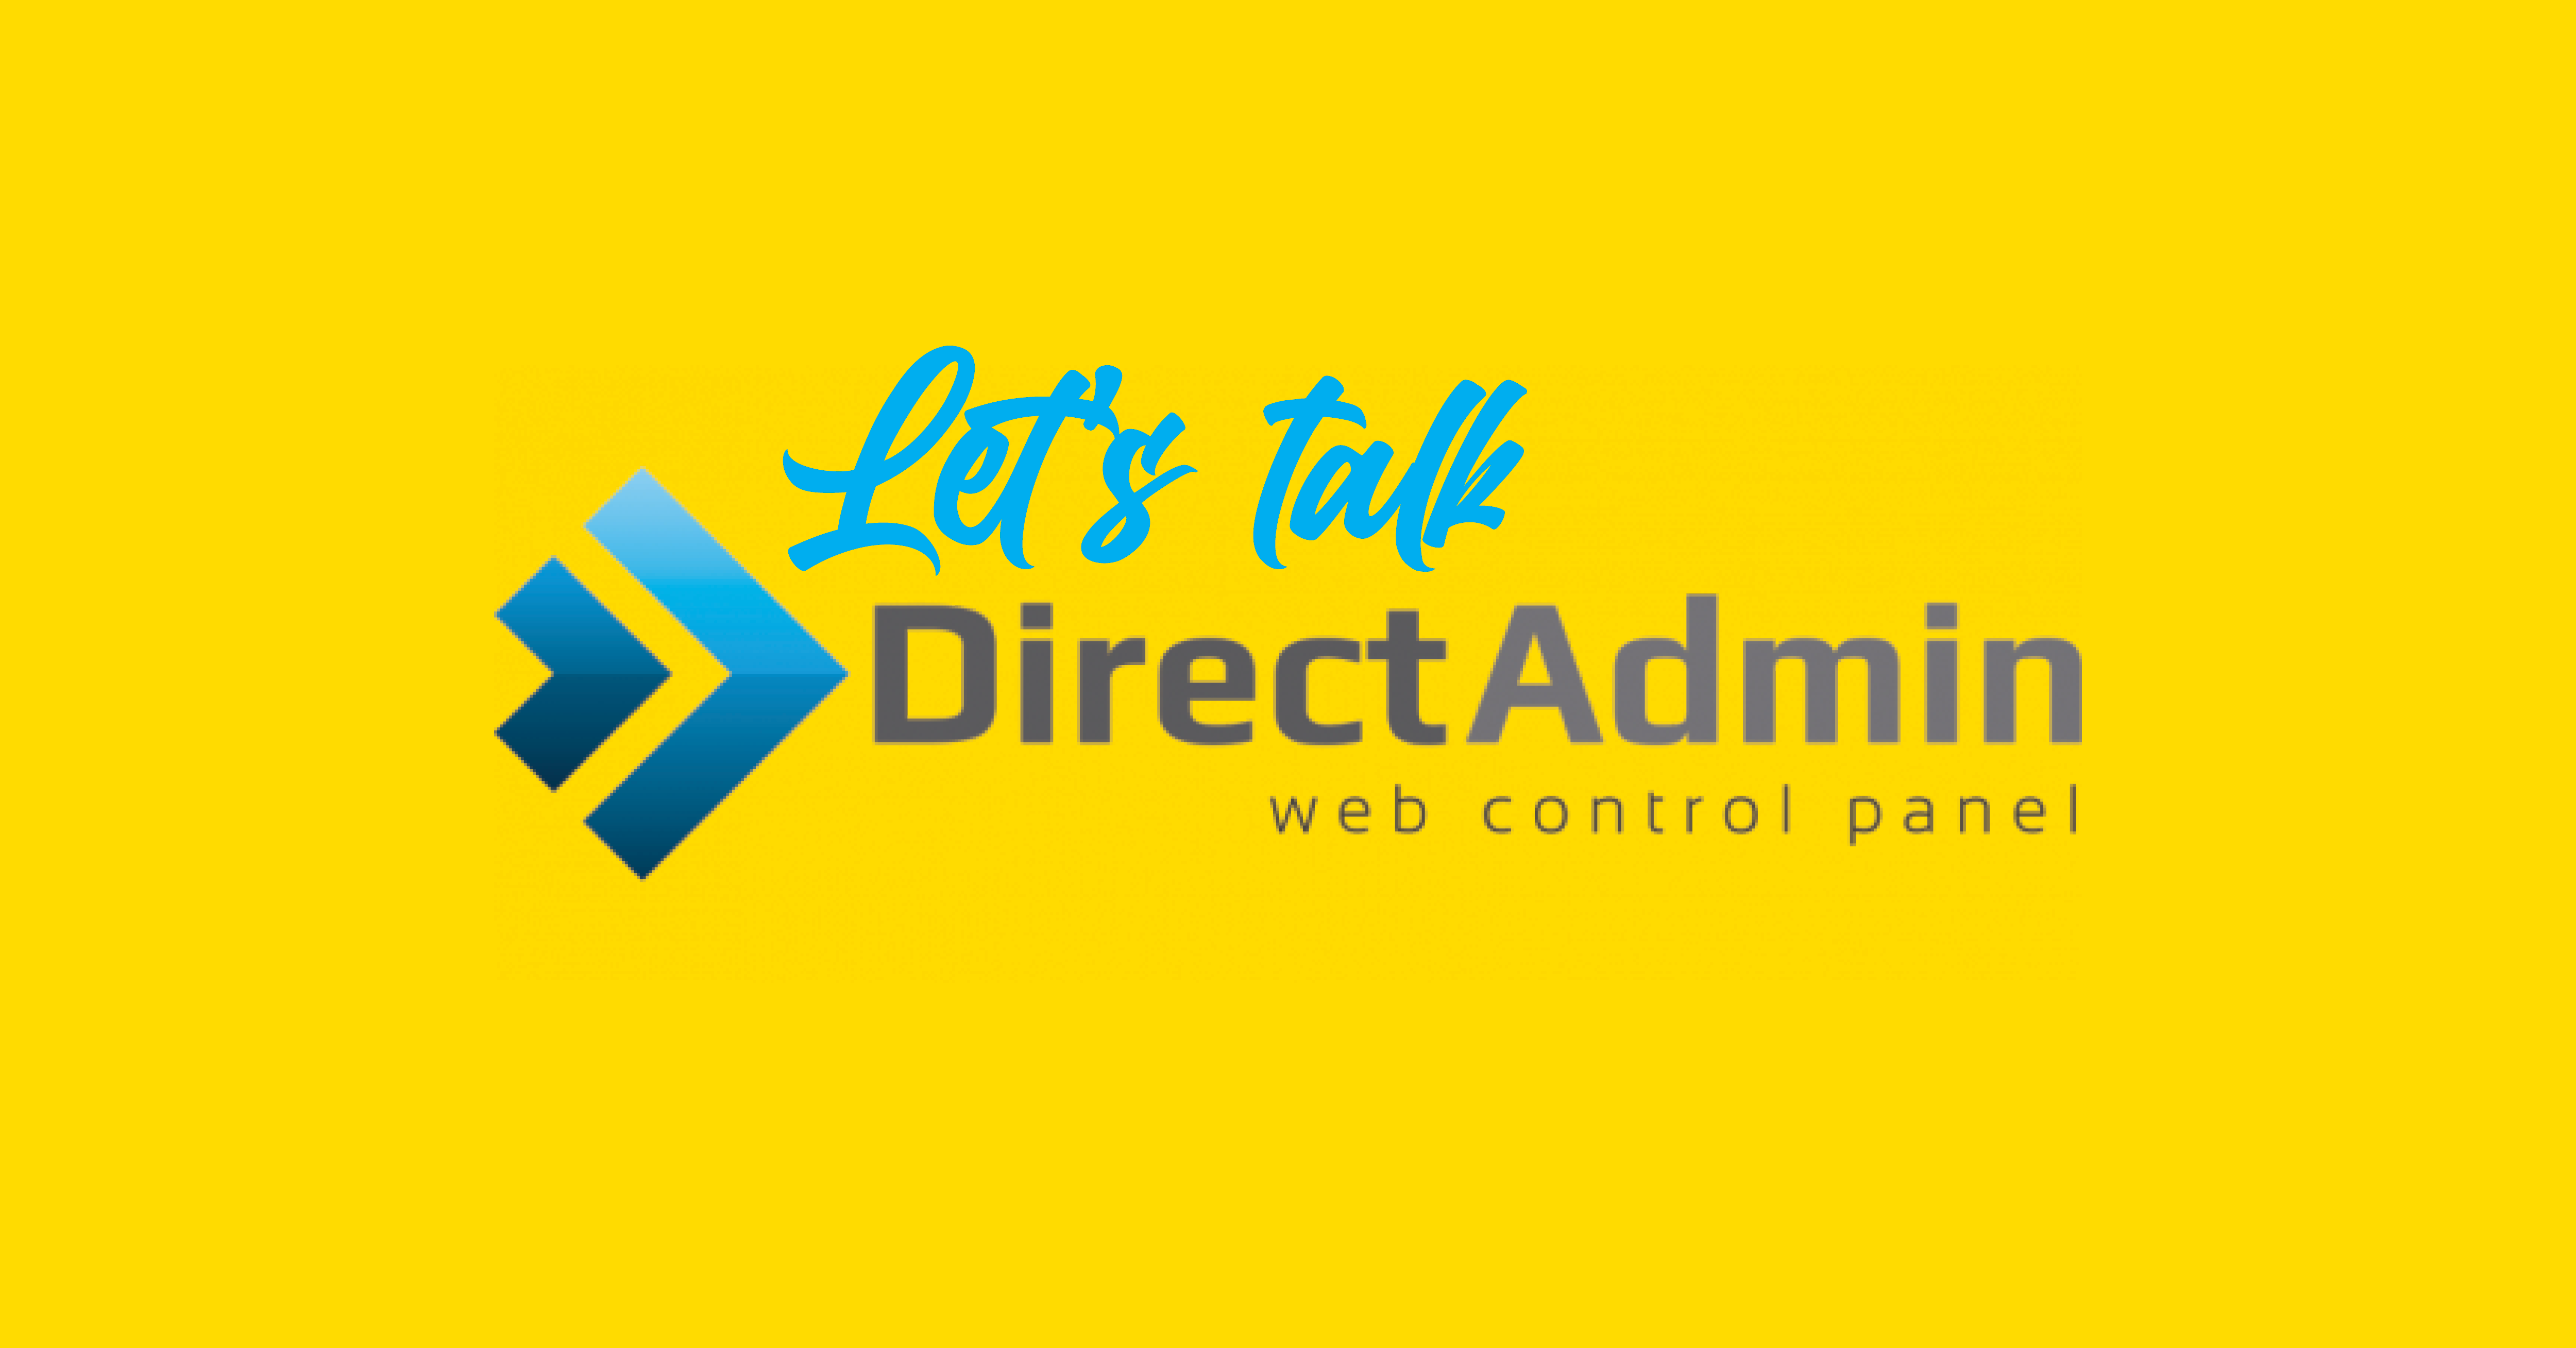 A Guide to All Things DirectAdmin